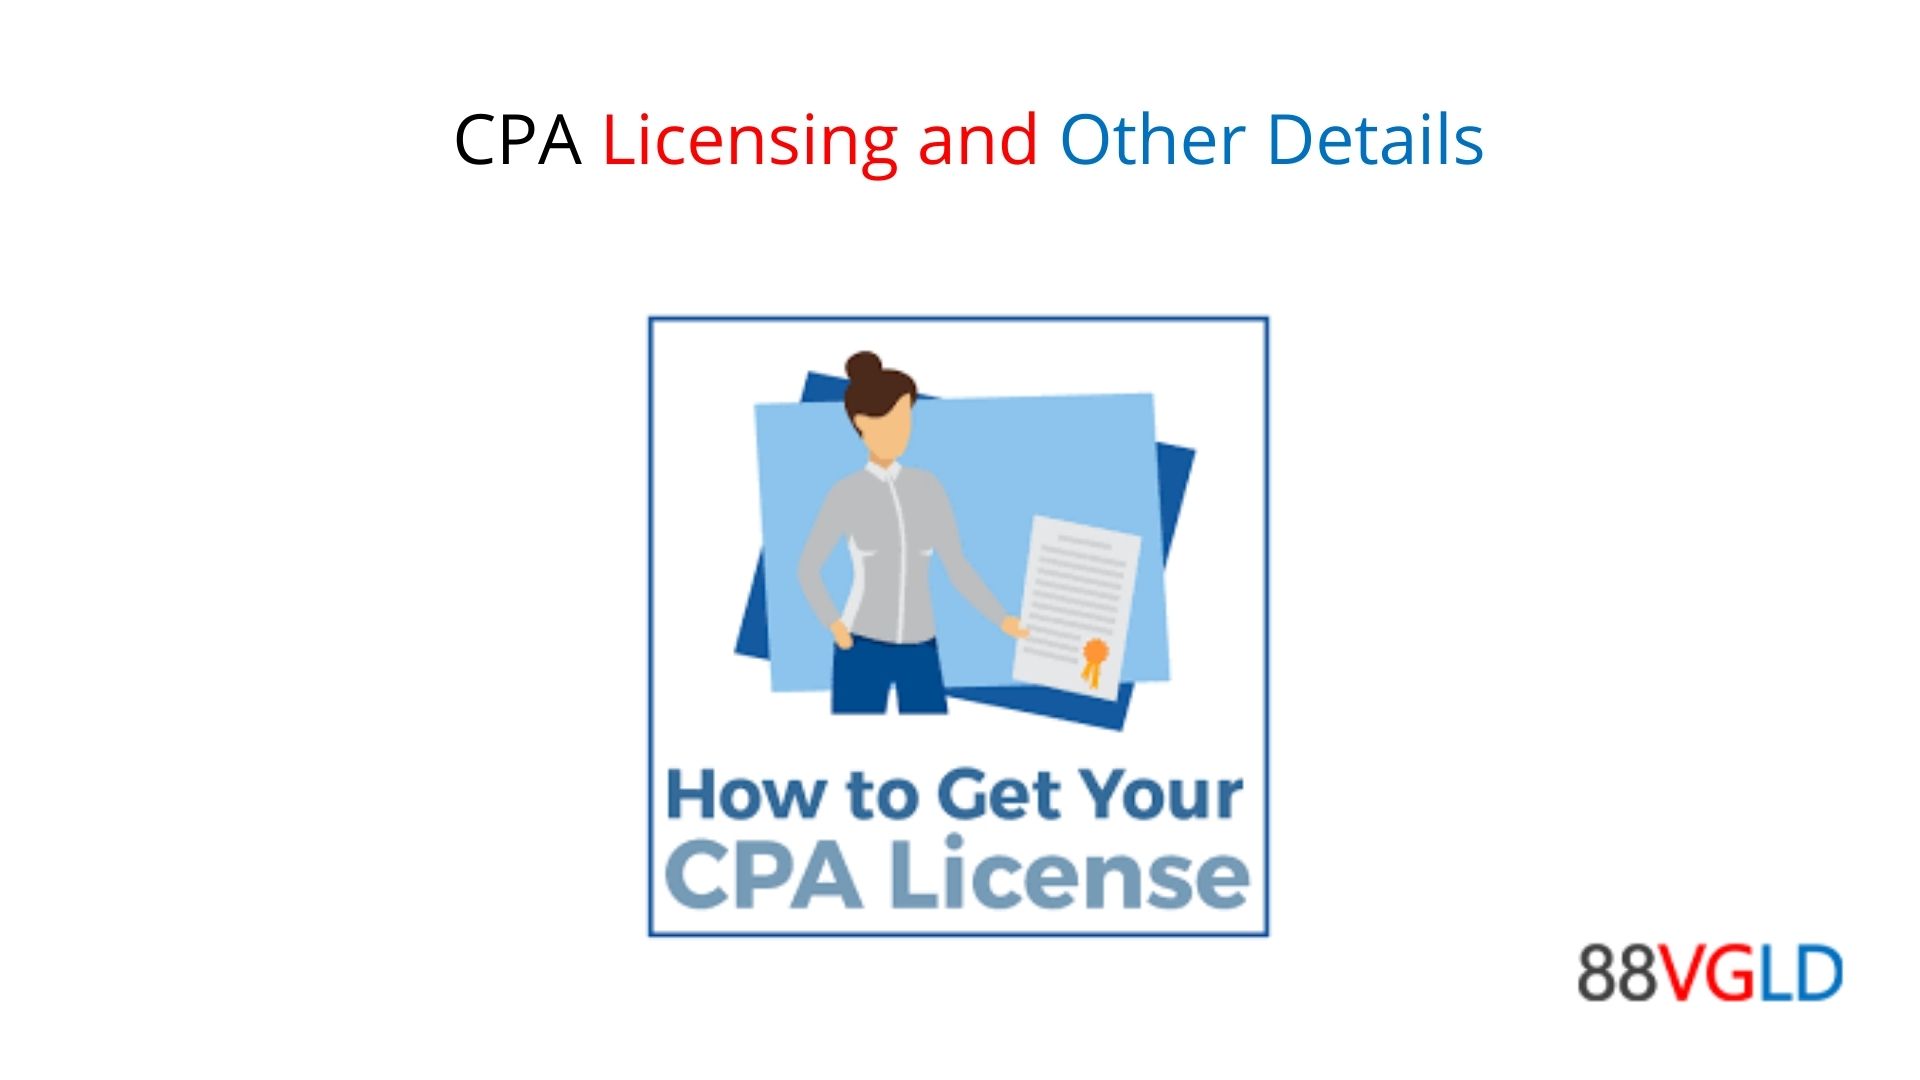 CPA Licensing and Other Details